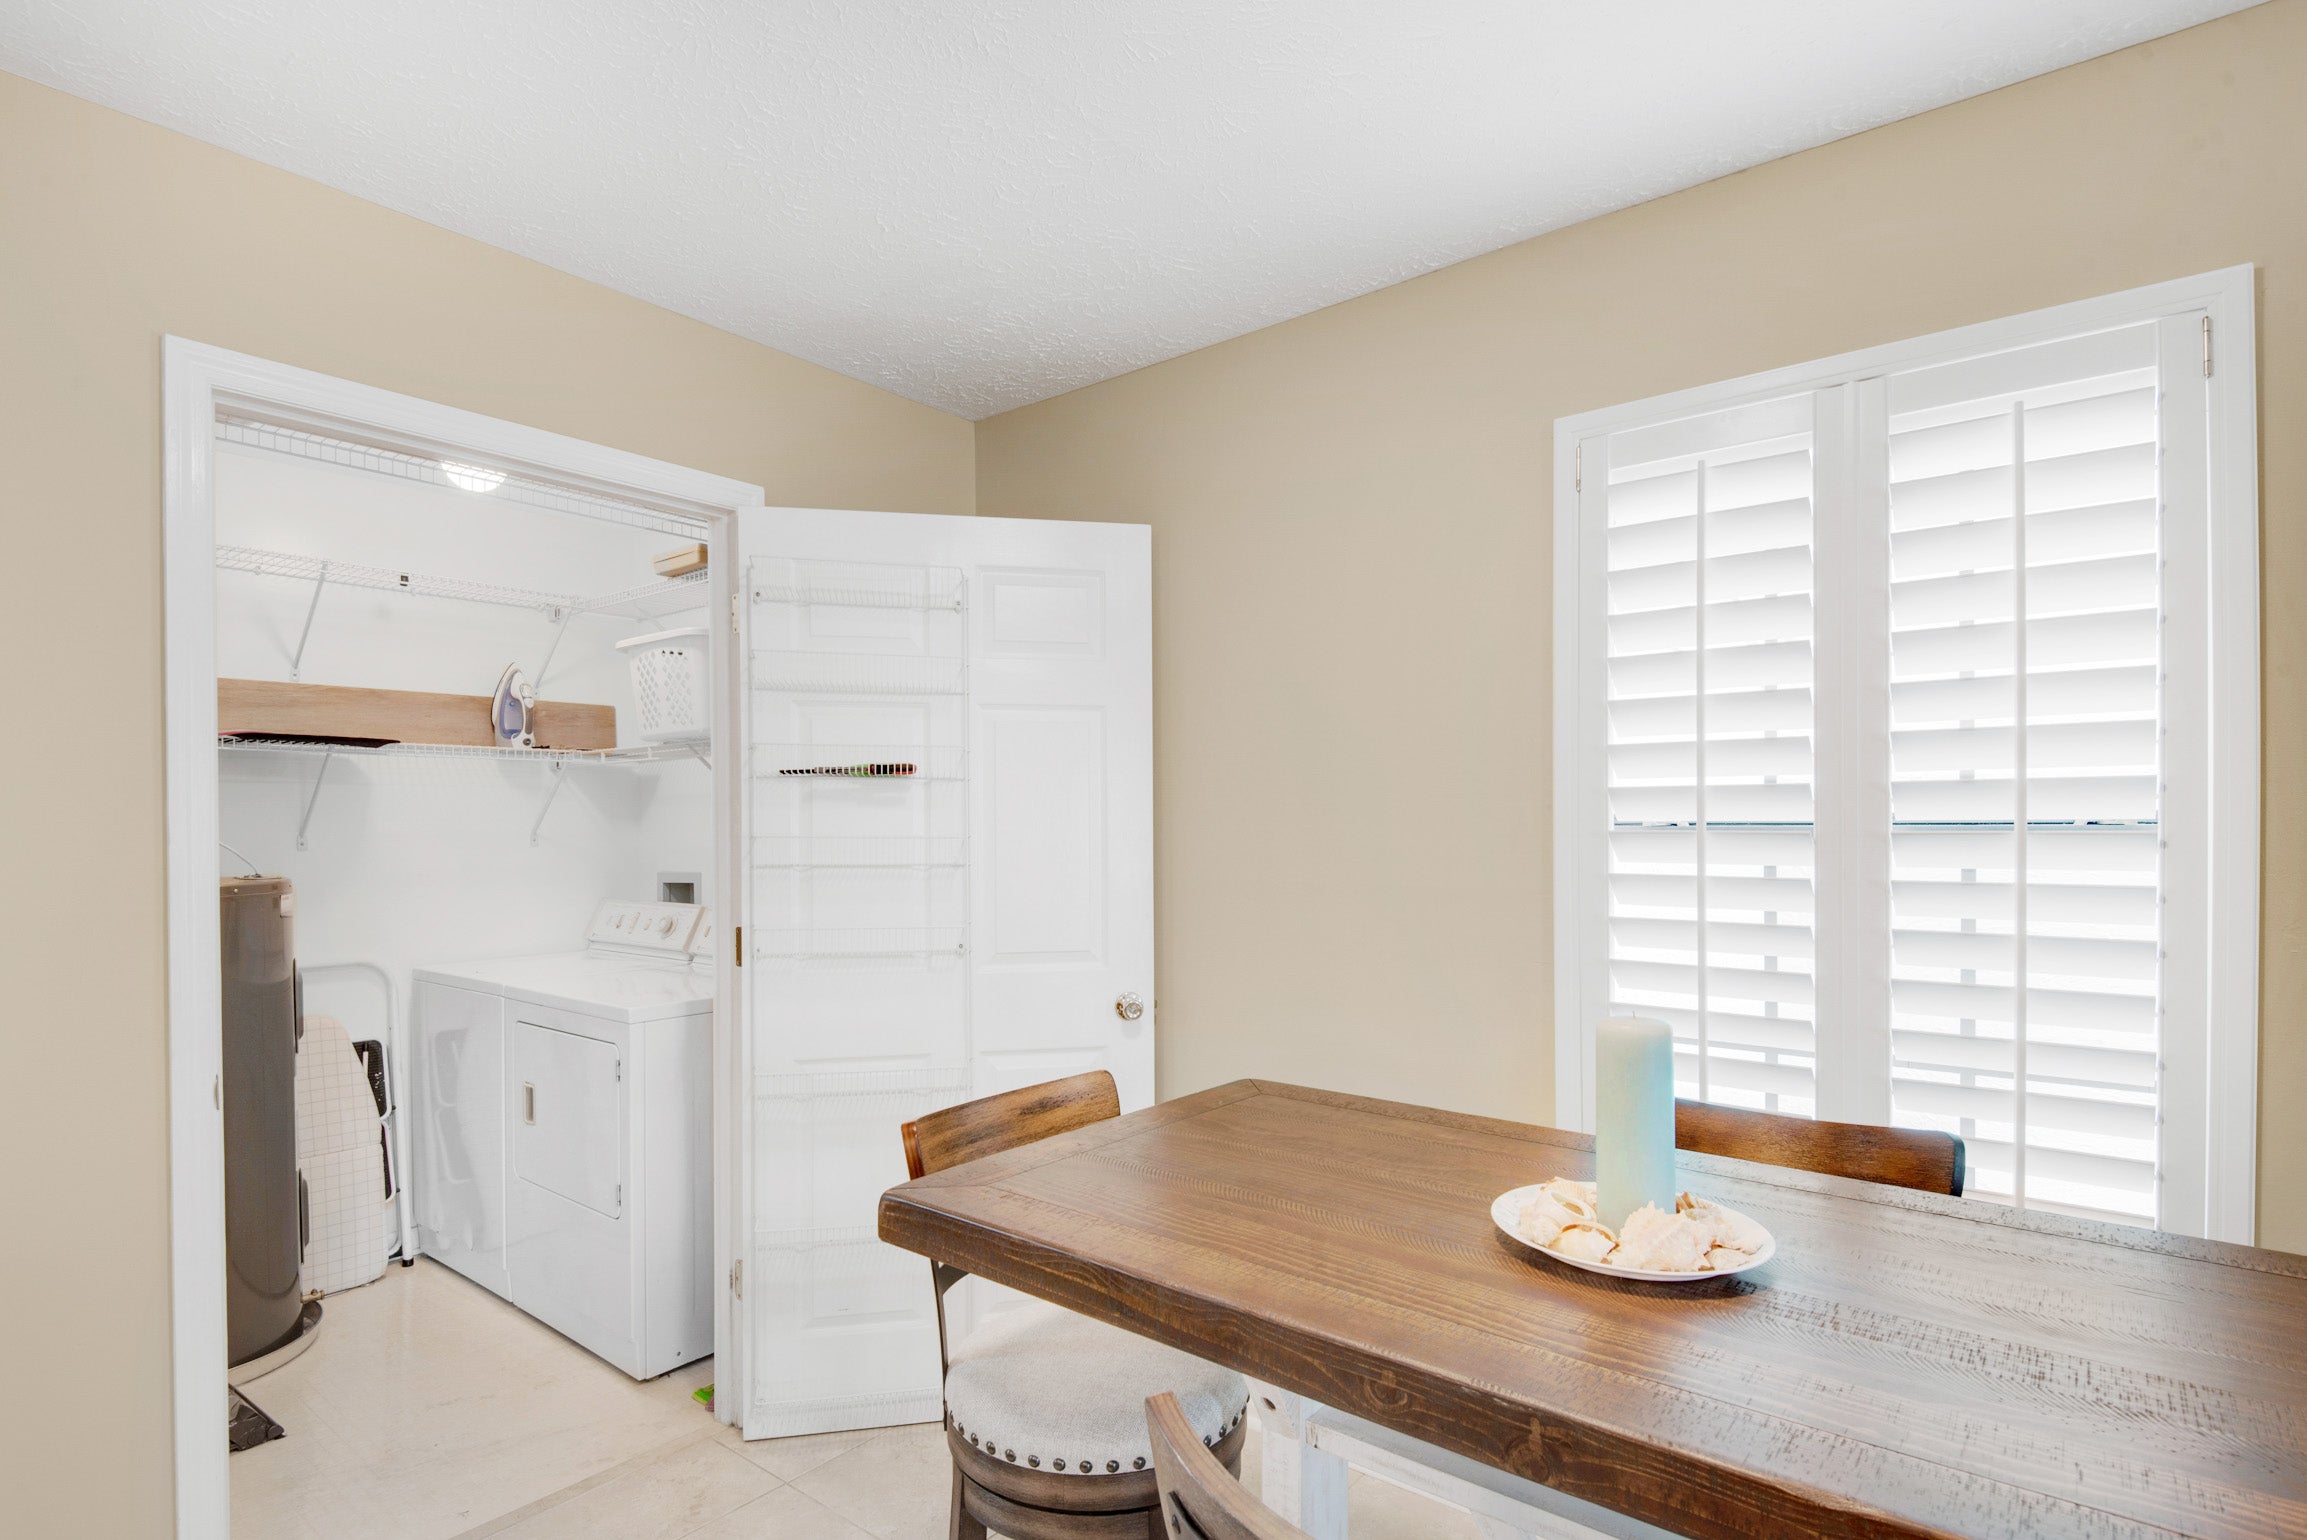 Dining to laundry room